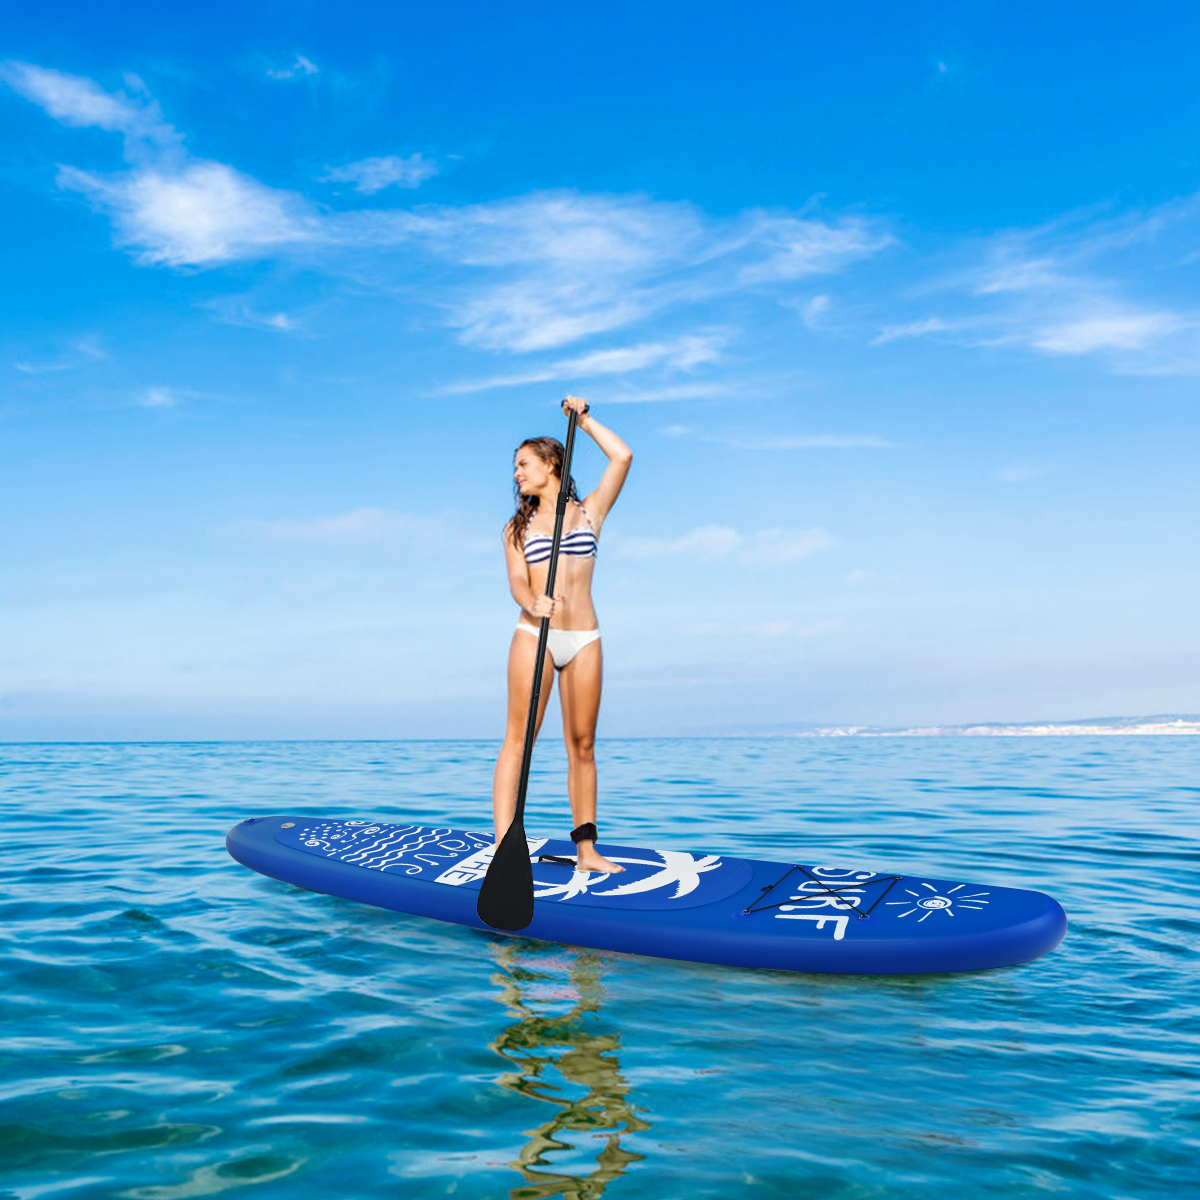 COSTWAY Board Blau Up Paddle, Stand SUP